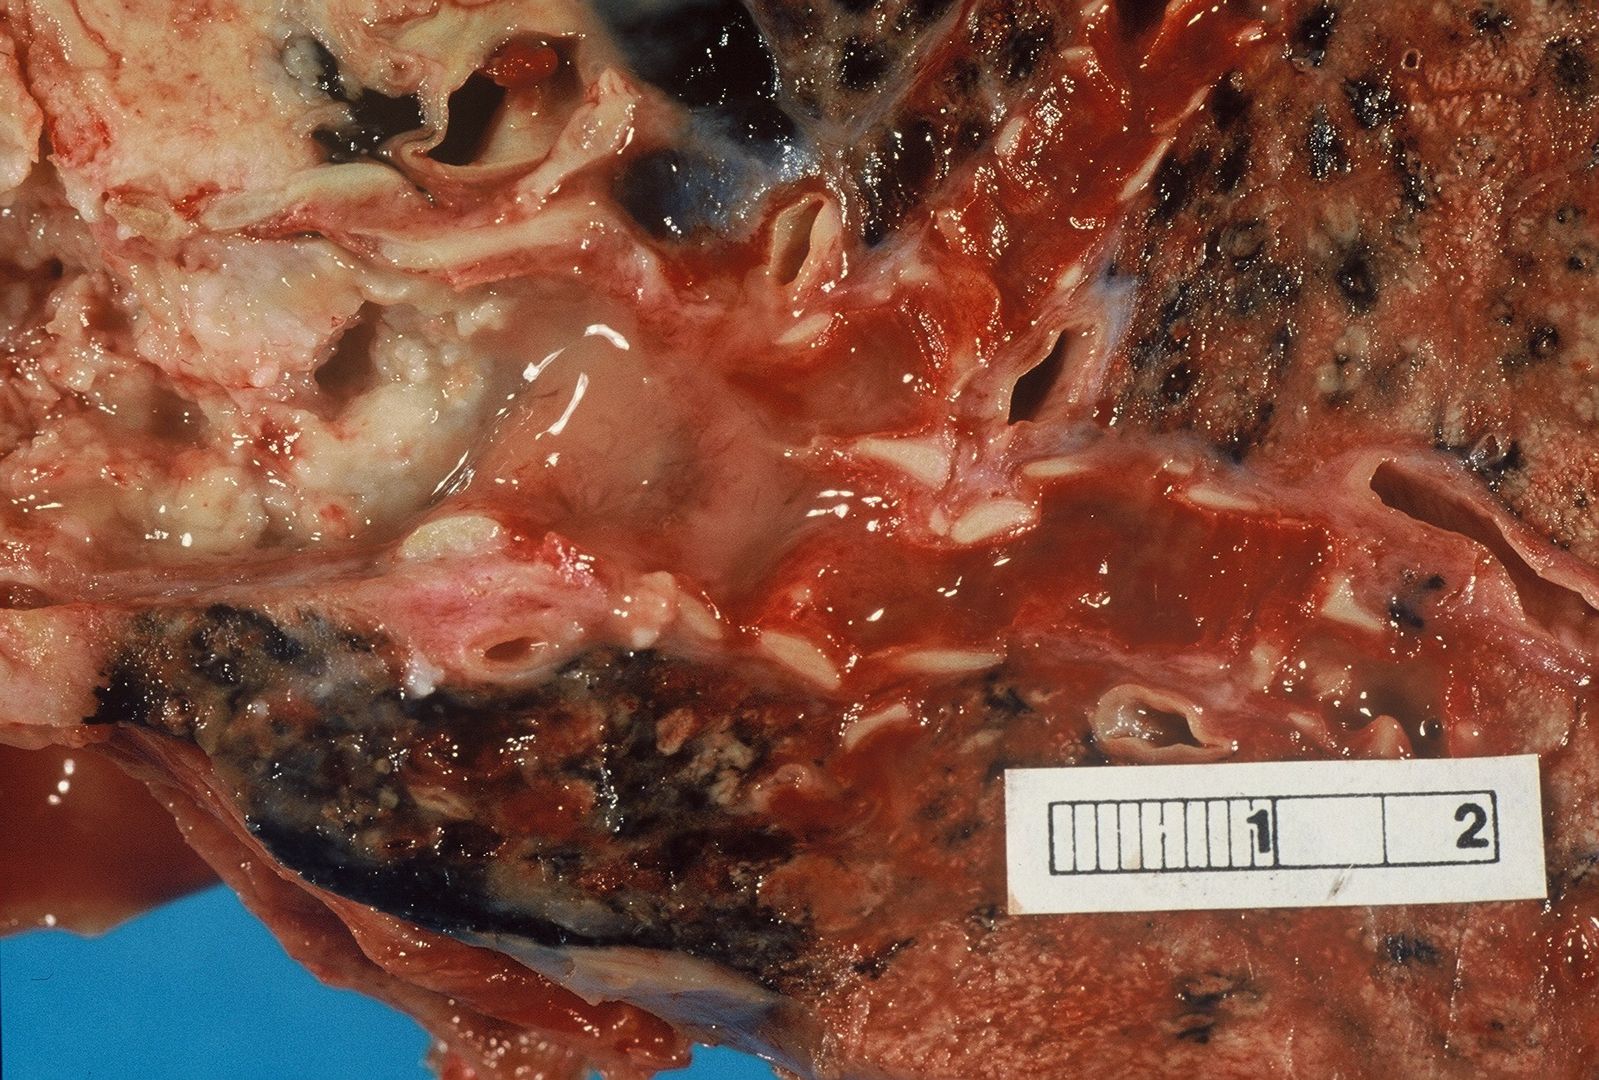 Gross pathology:Bronchial squamous lung cell cancer